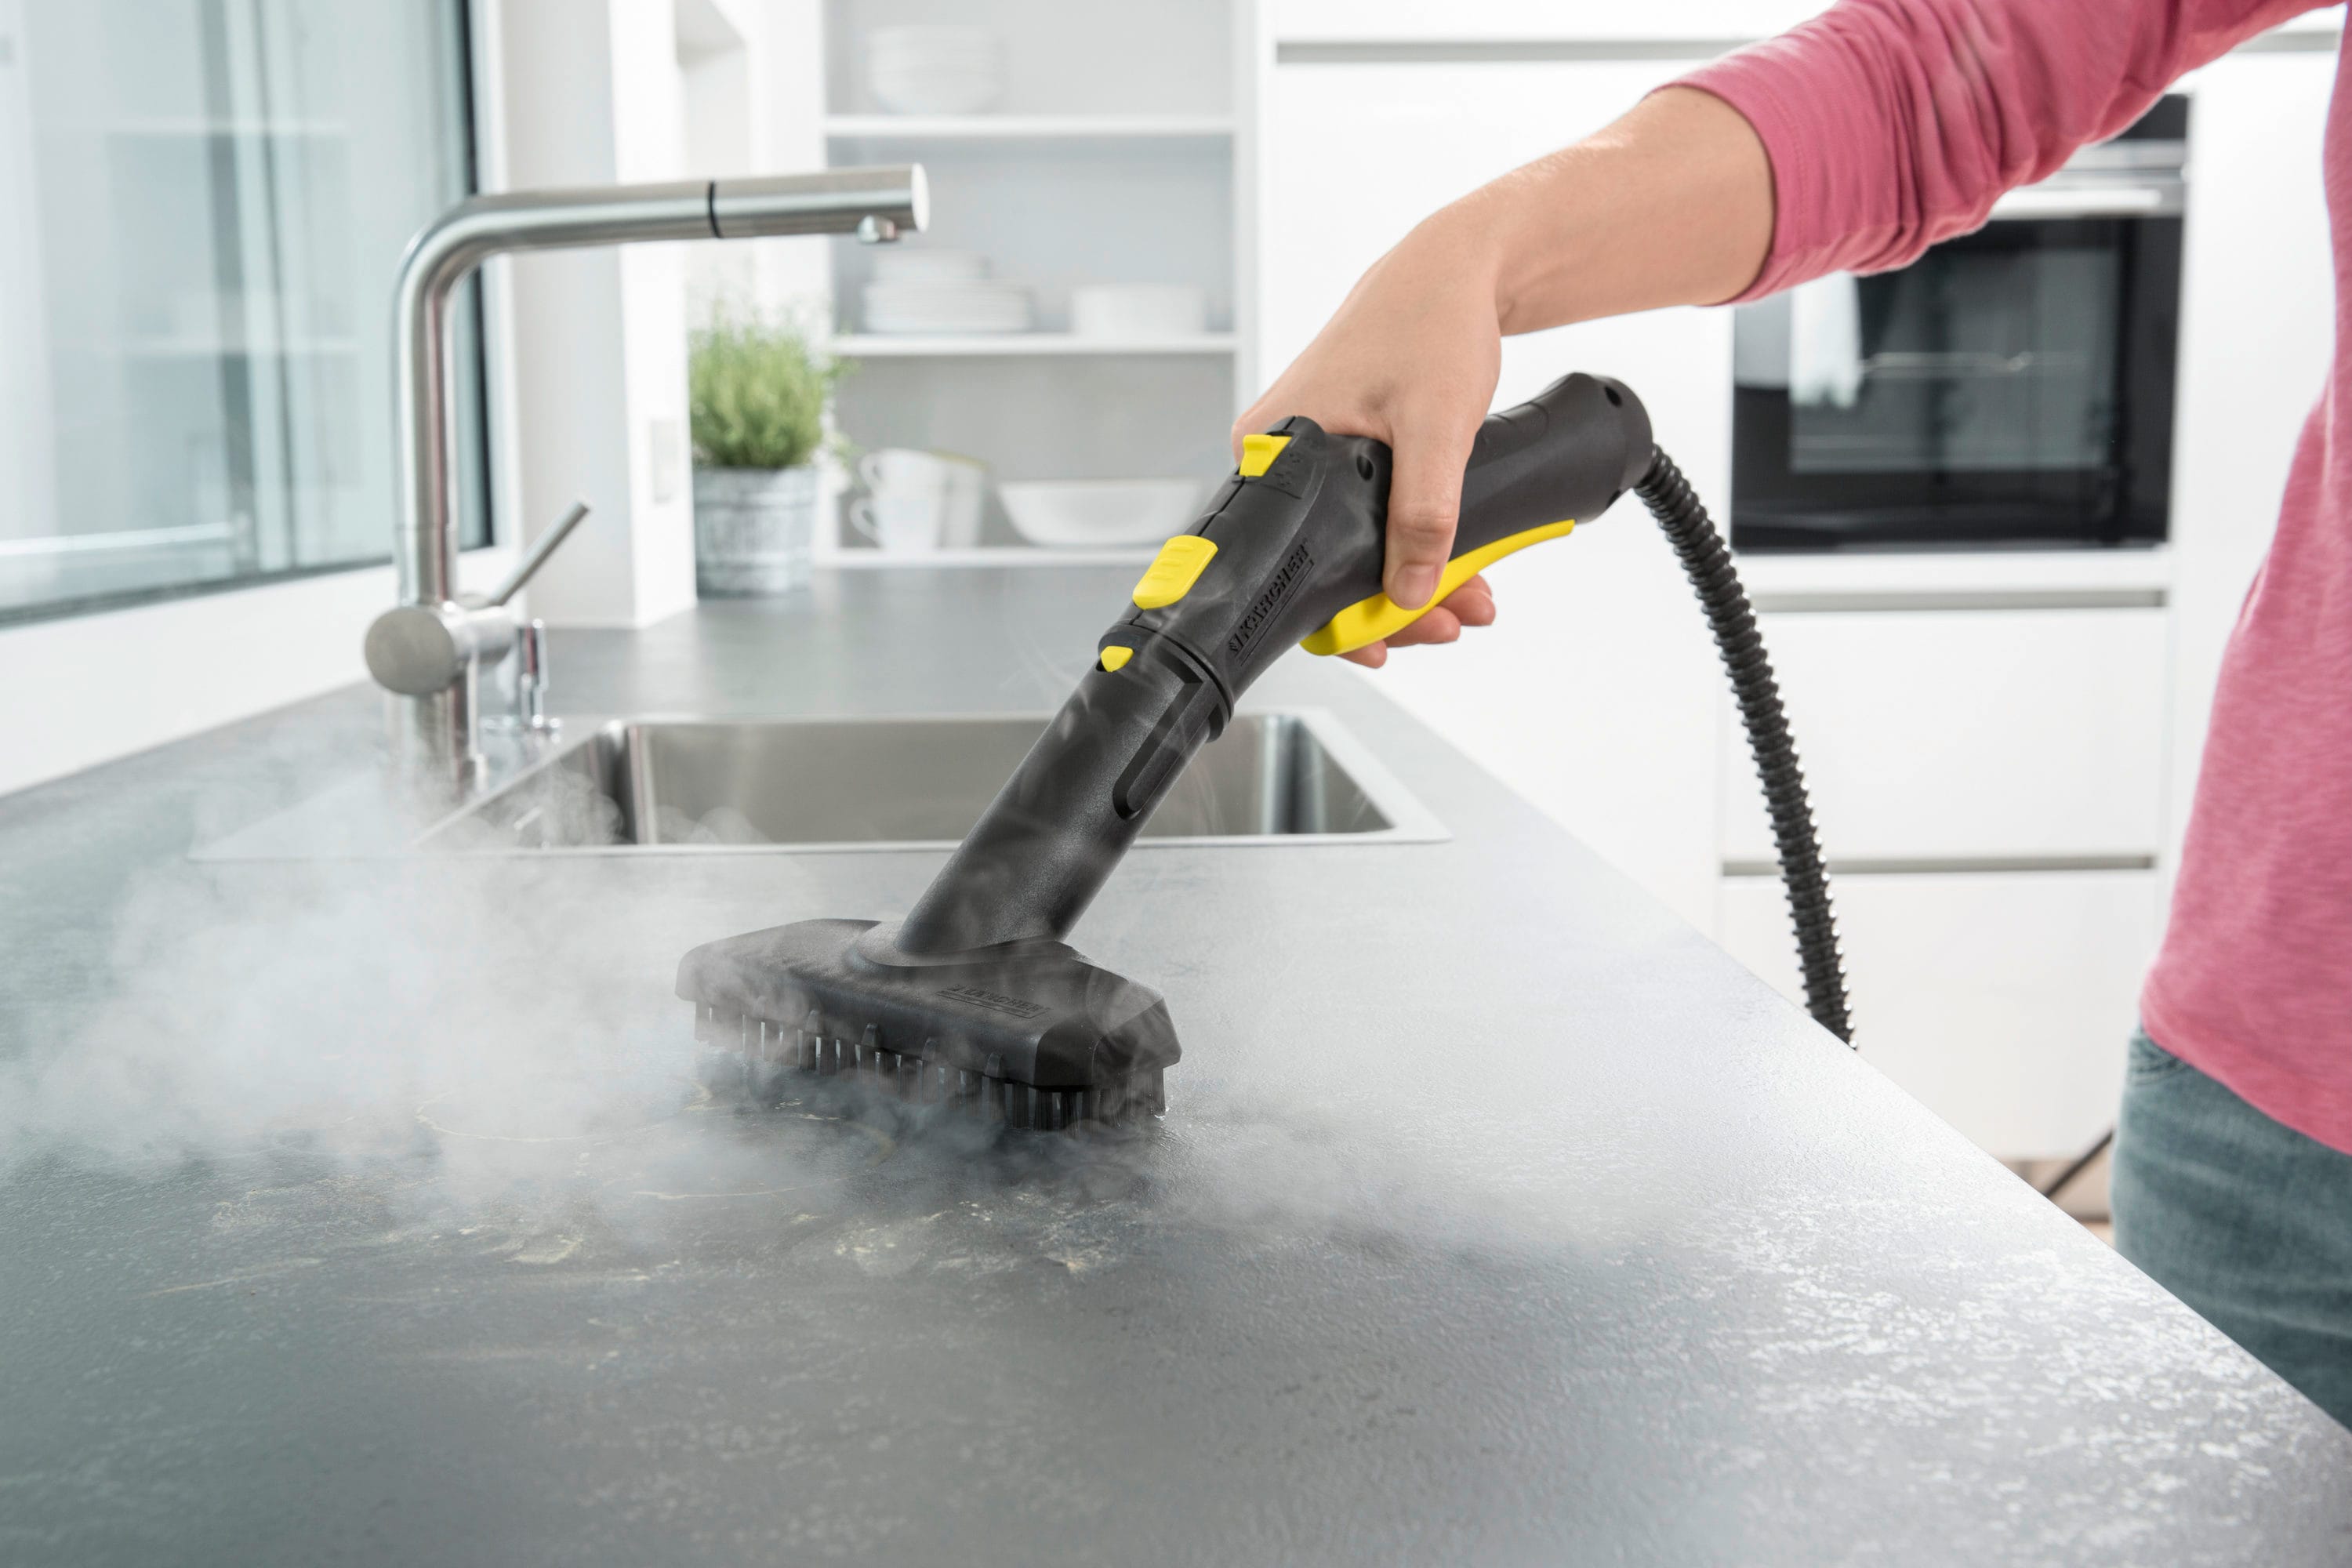 Details about   Karcher SC 3 EasyFix Steam Cleaner used house cleaning open box mop 